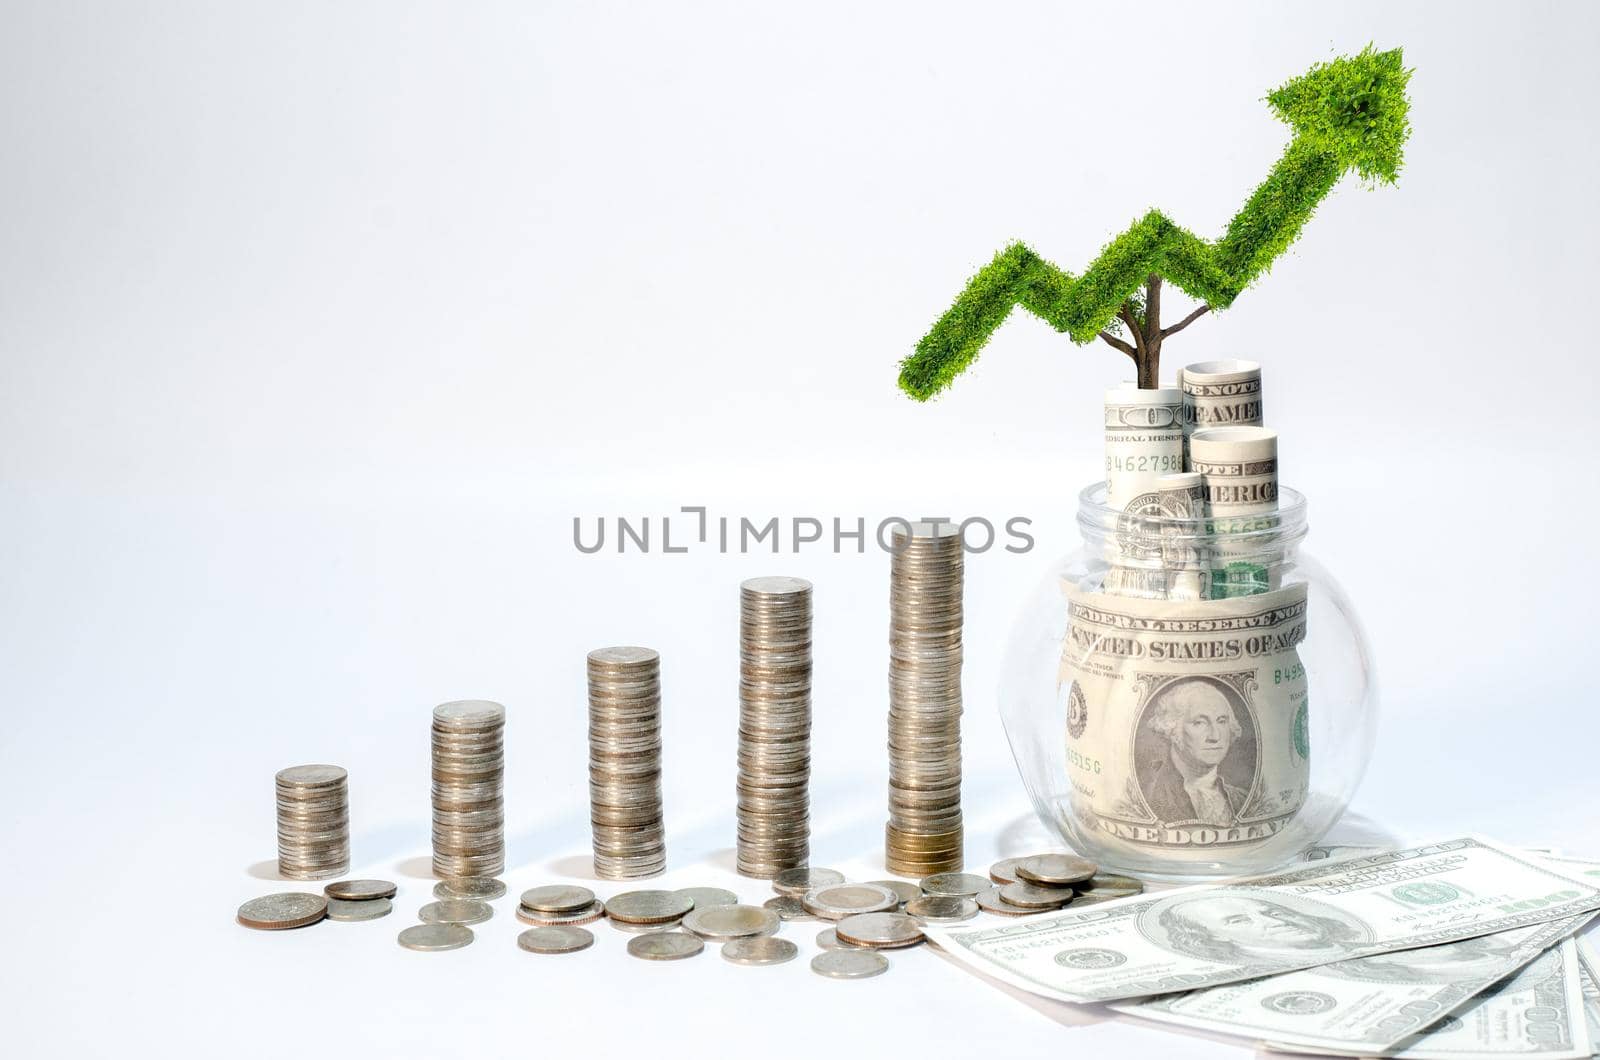 Growing graph finance The growth of business finance The gradation from low to high